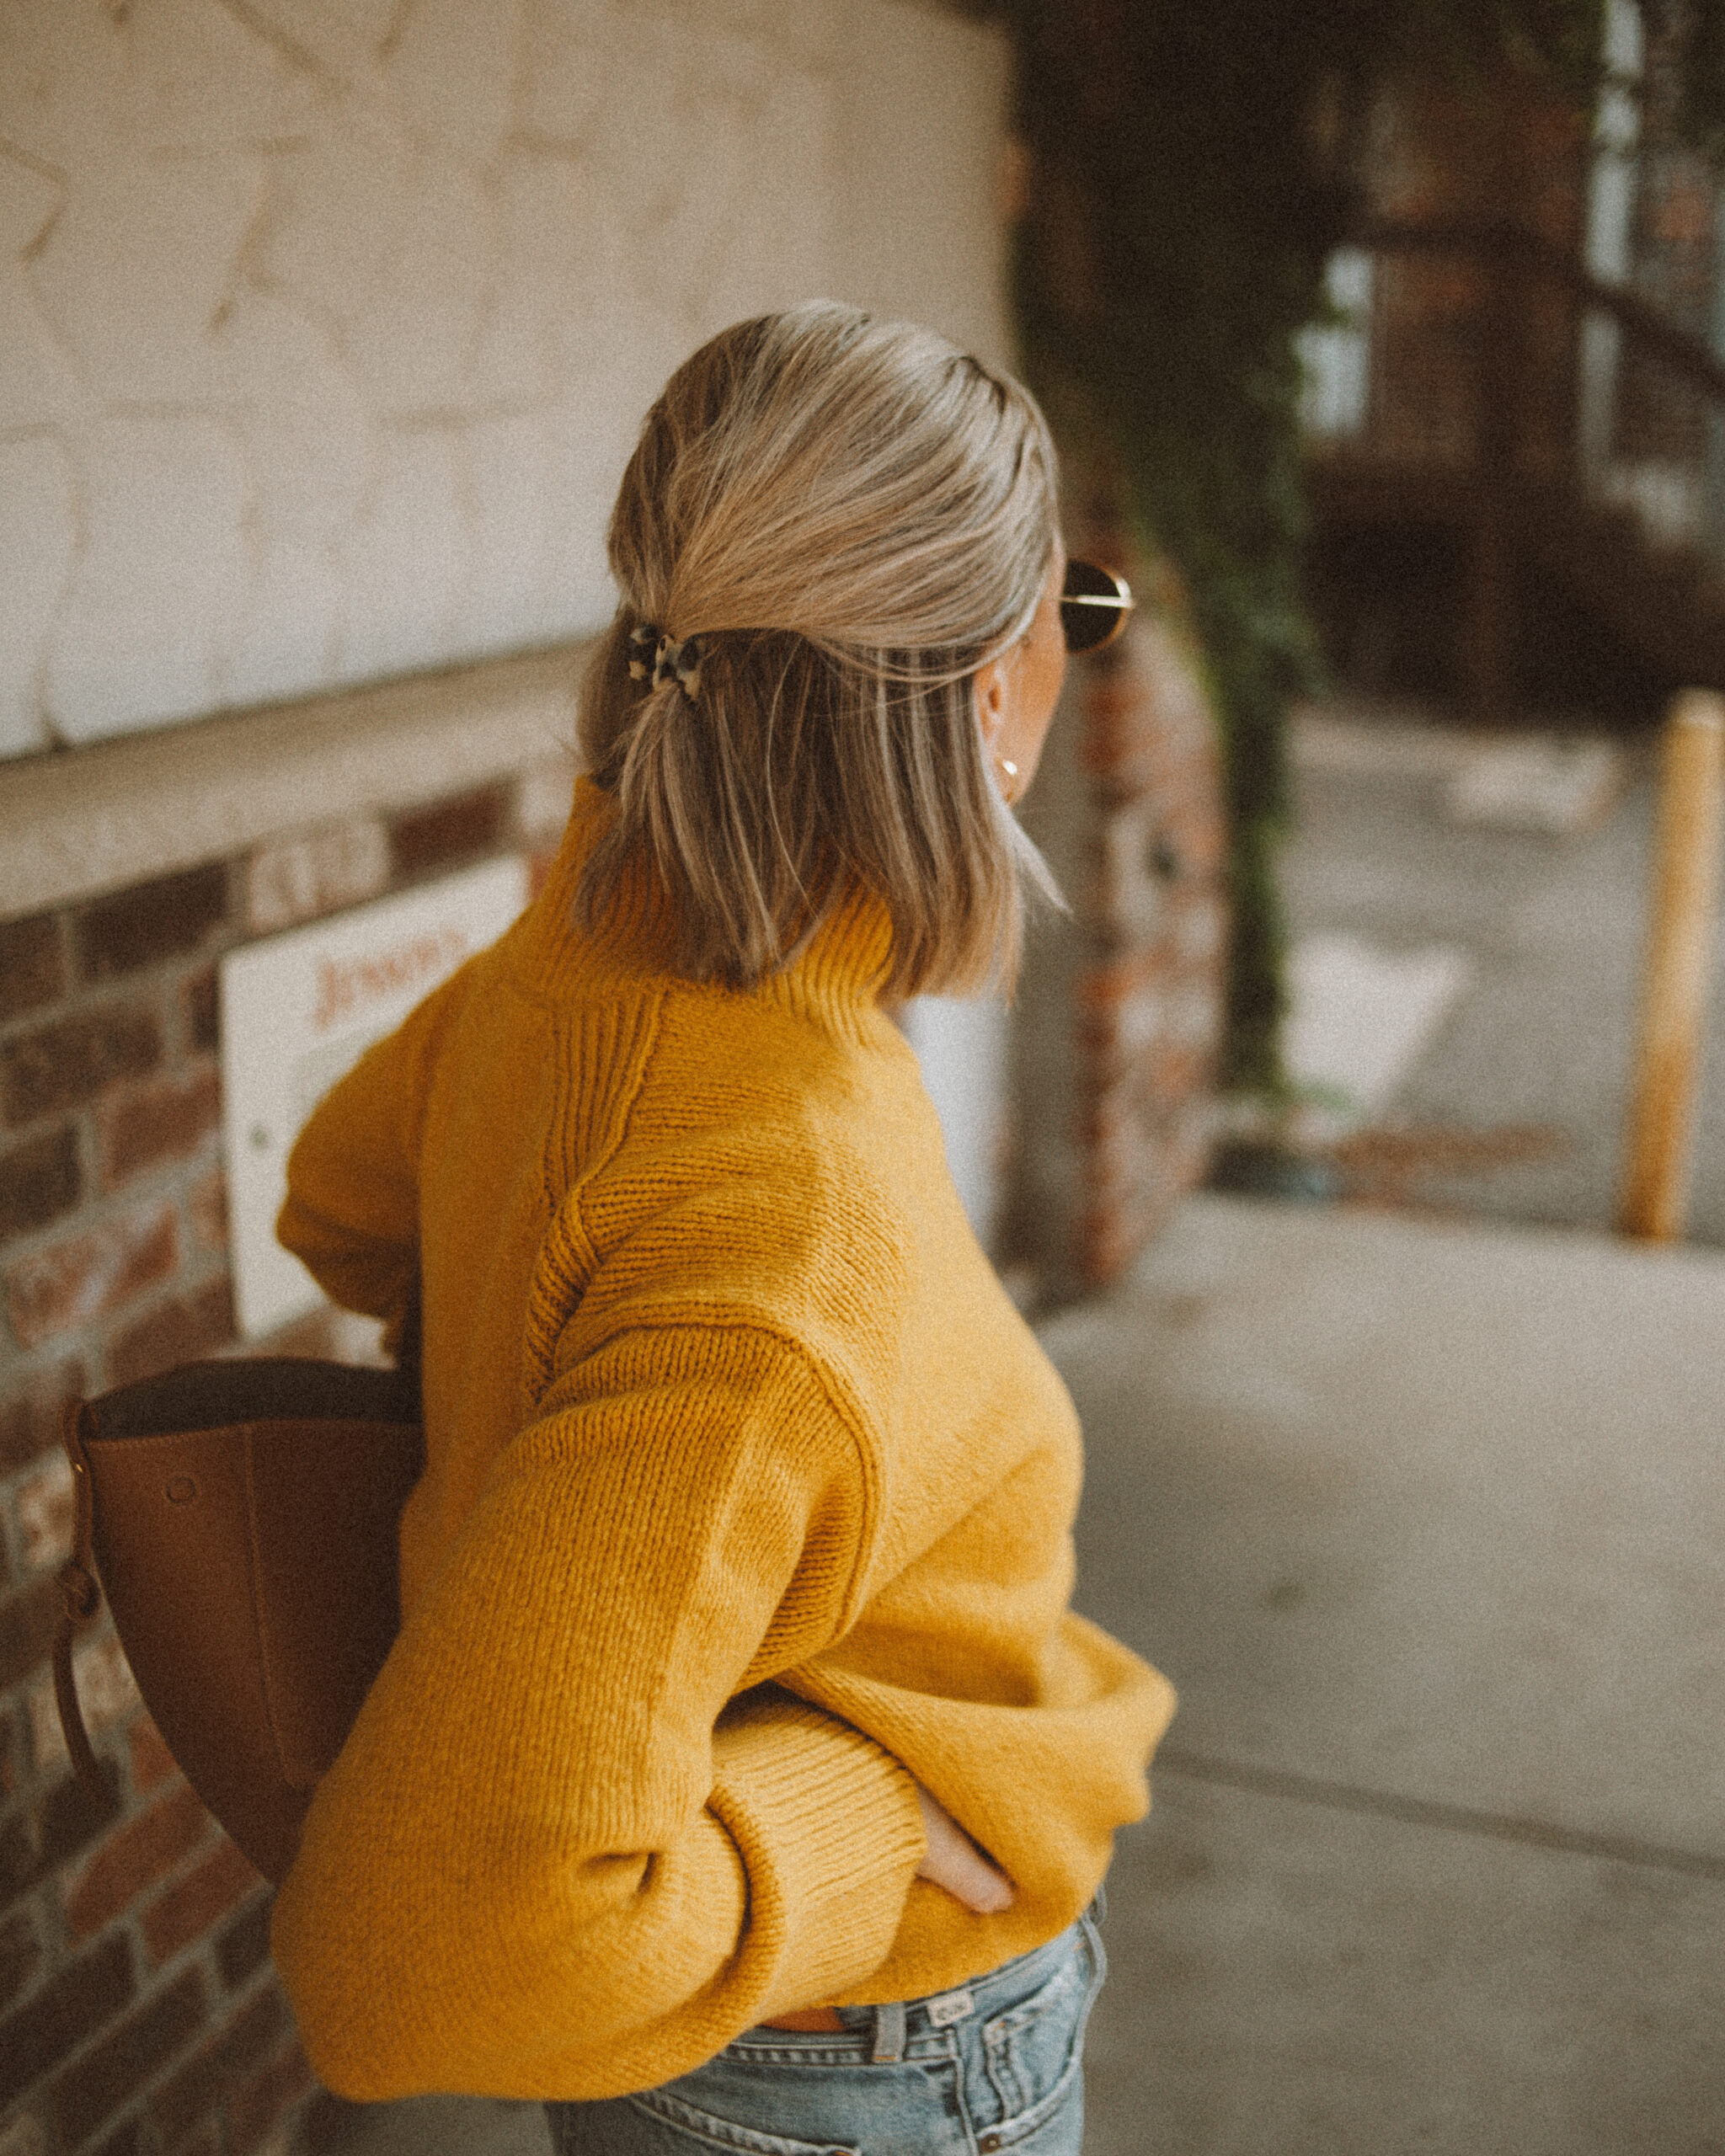 Karin Emily wears a goldenrod yellow turtleneck sweater from Alex Mill with her favorite Charlotte Jeans from CItizens of Humanity, a Polene Cyme Bag, Everlane Day Glove Flats, and chunky gold jewelry